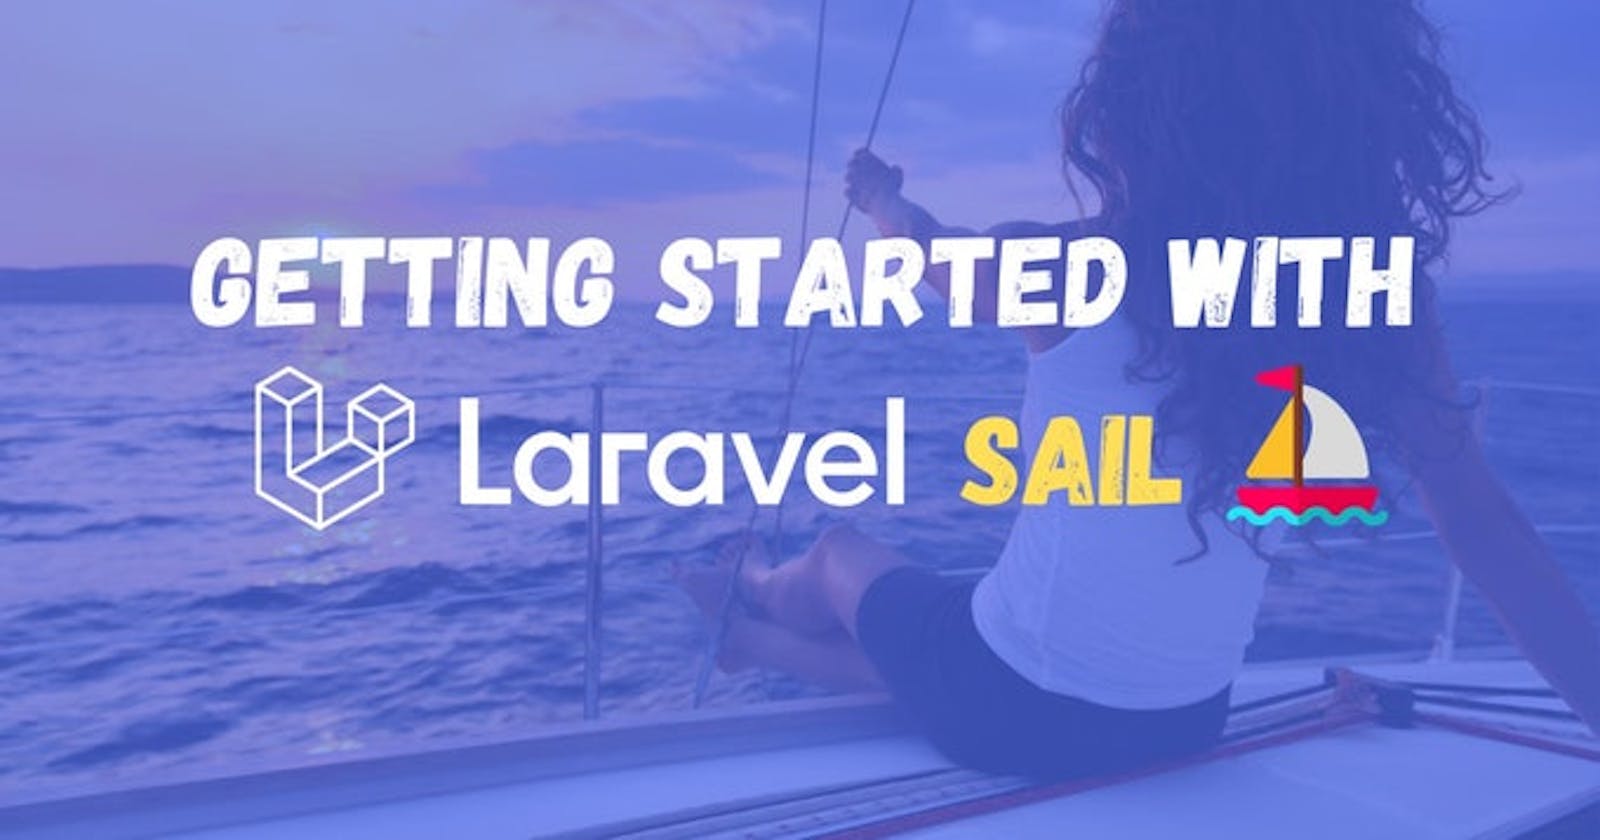 What is Laravel Sail and how to get started?